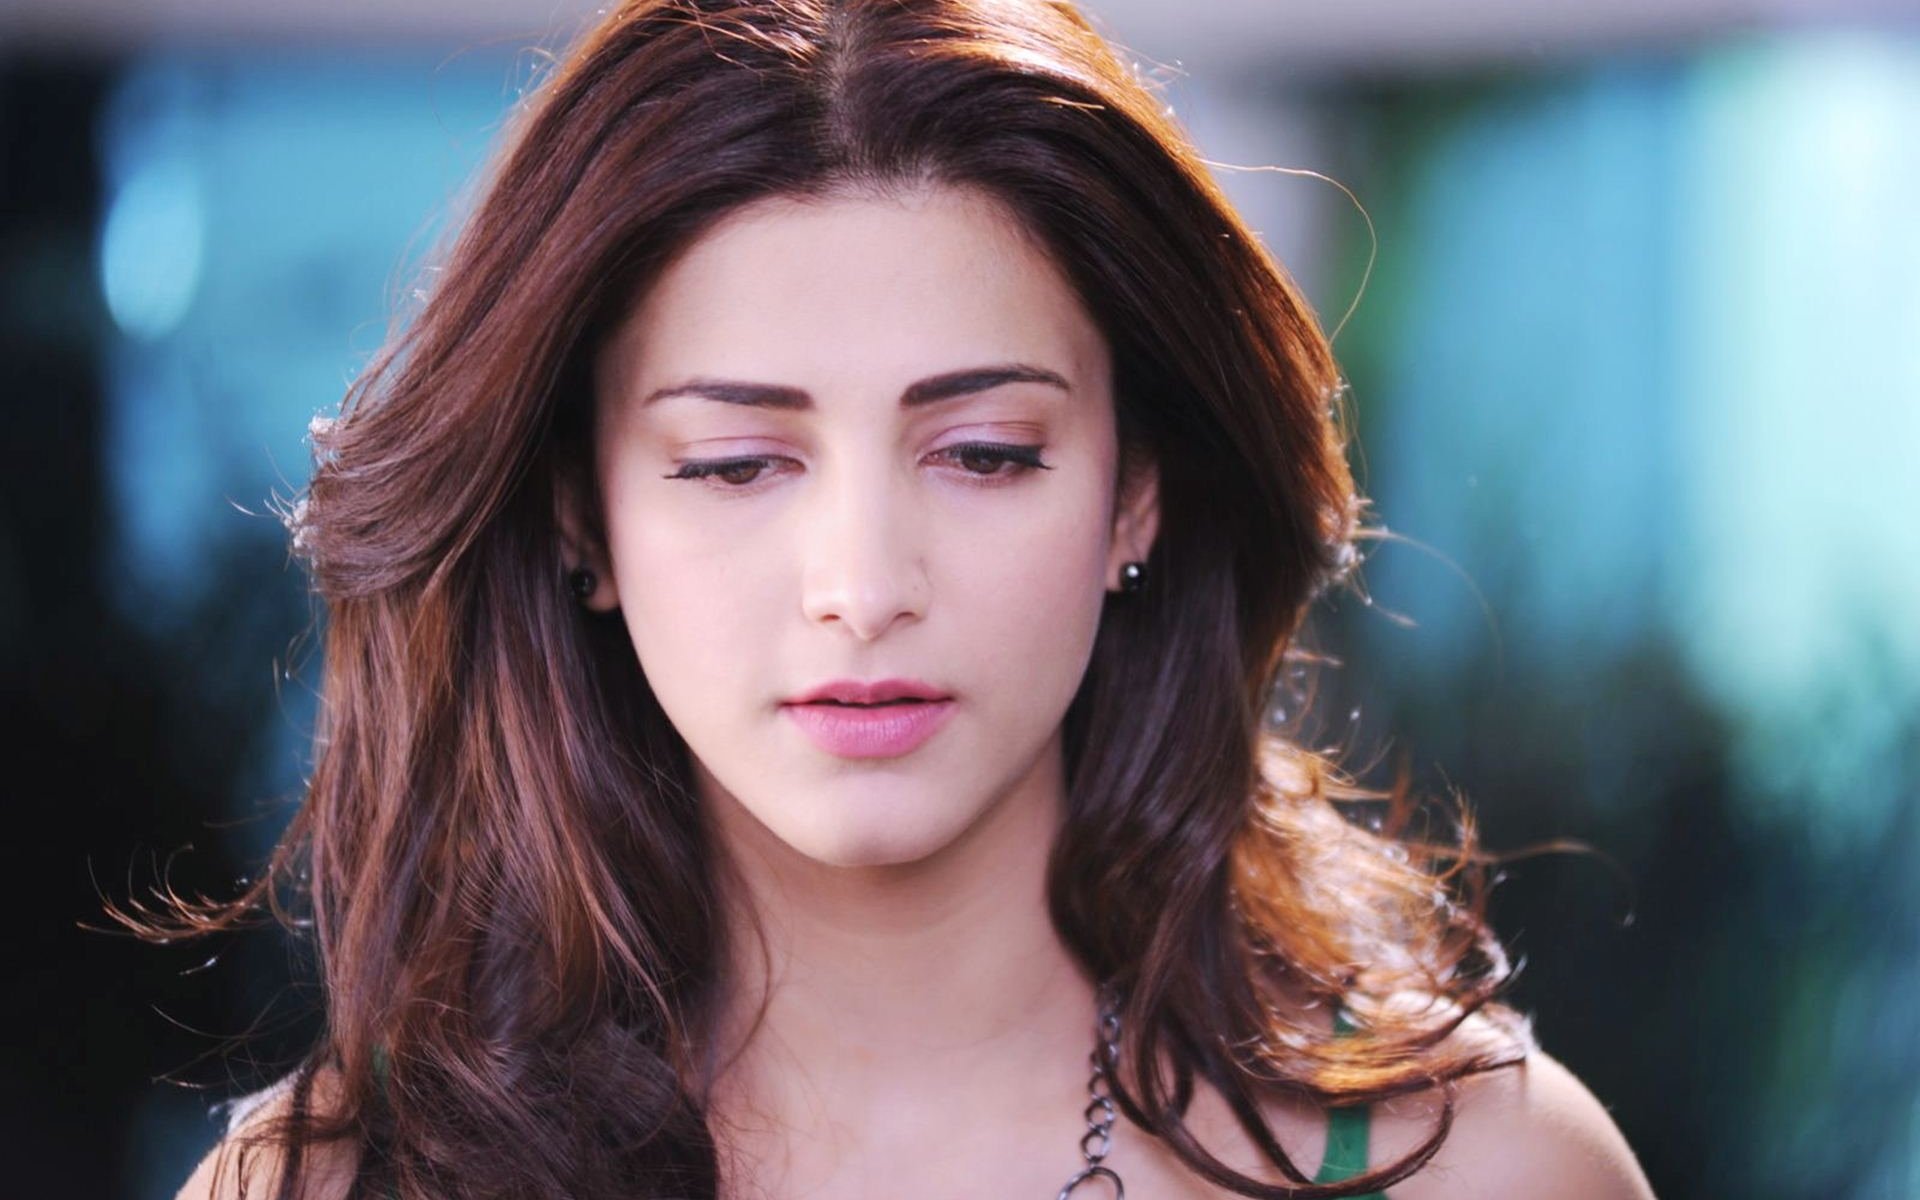 Cool Wallpapers shruti haasan, bollywood, celebrity, face